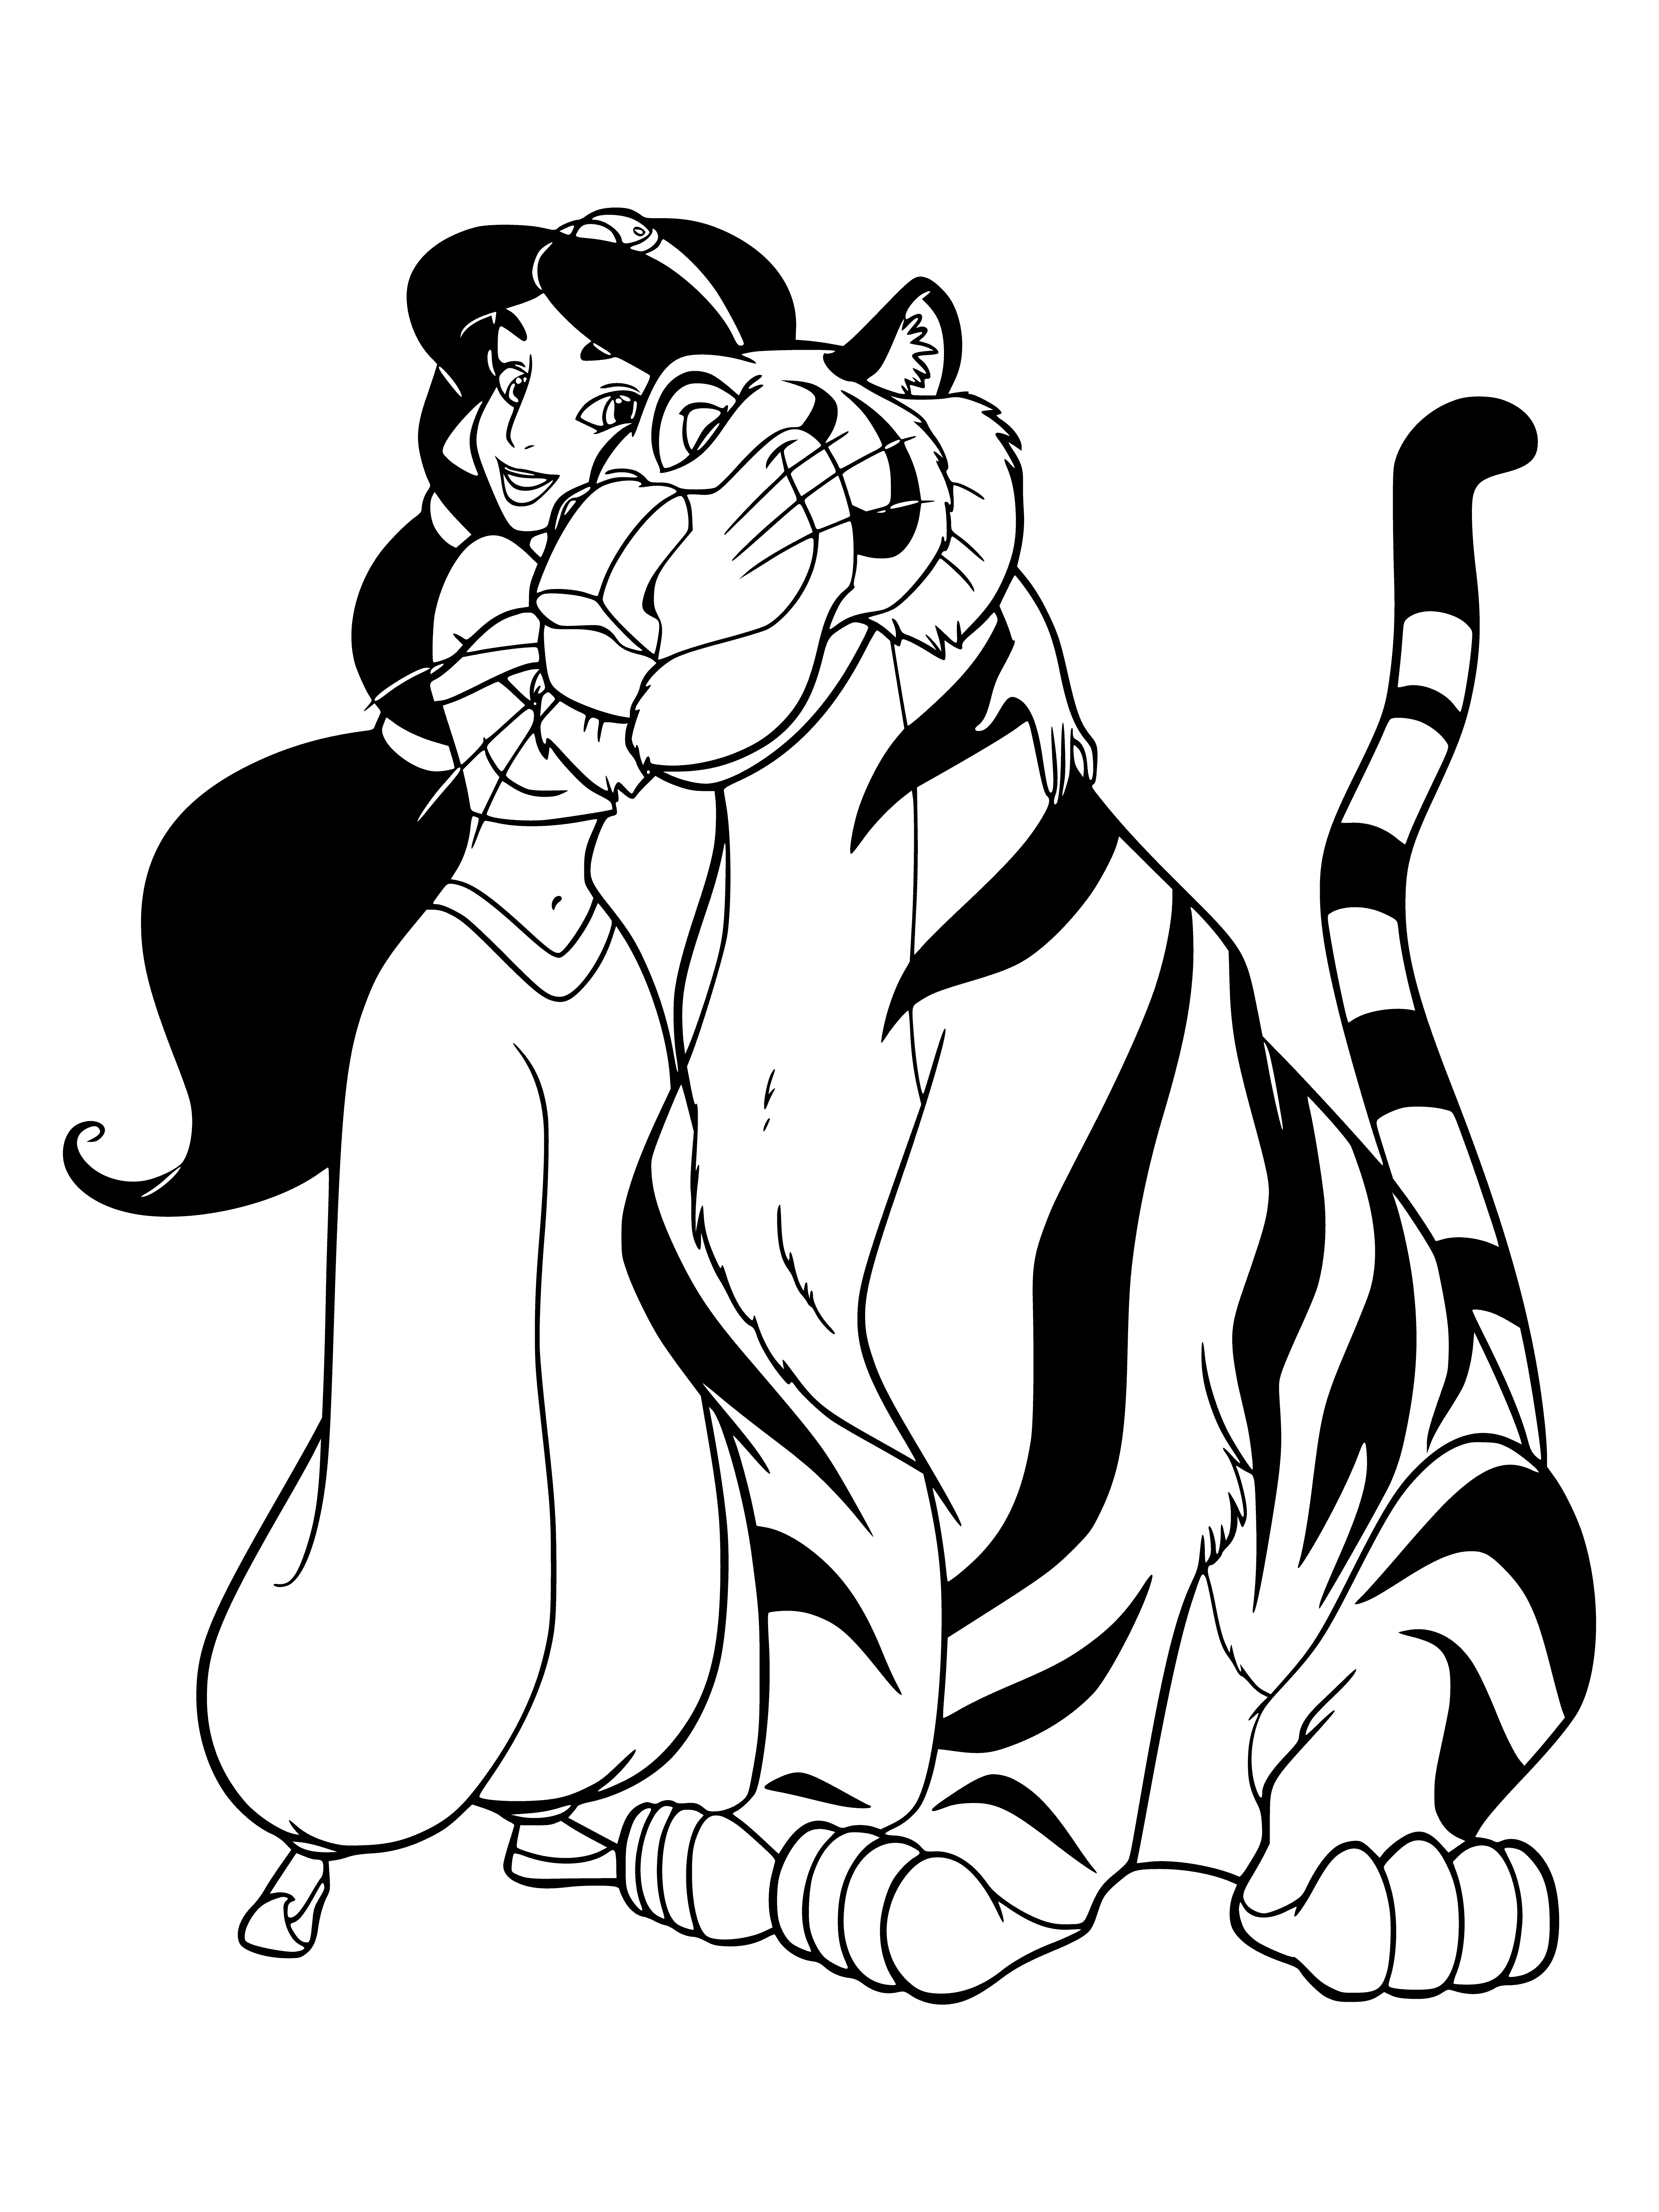 coloring page: A man in white & gold with a sword kneels b4 a woman in blue & white with a purple veil. A tiger stands behind them, smiles on their faces.